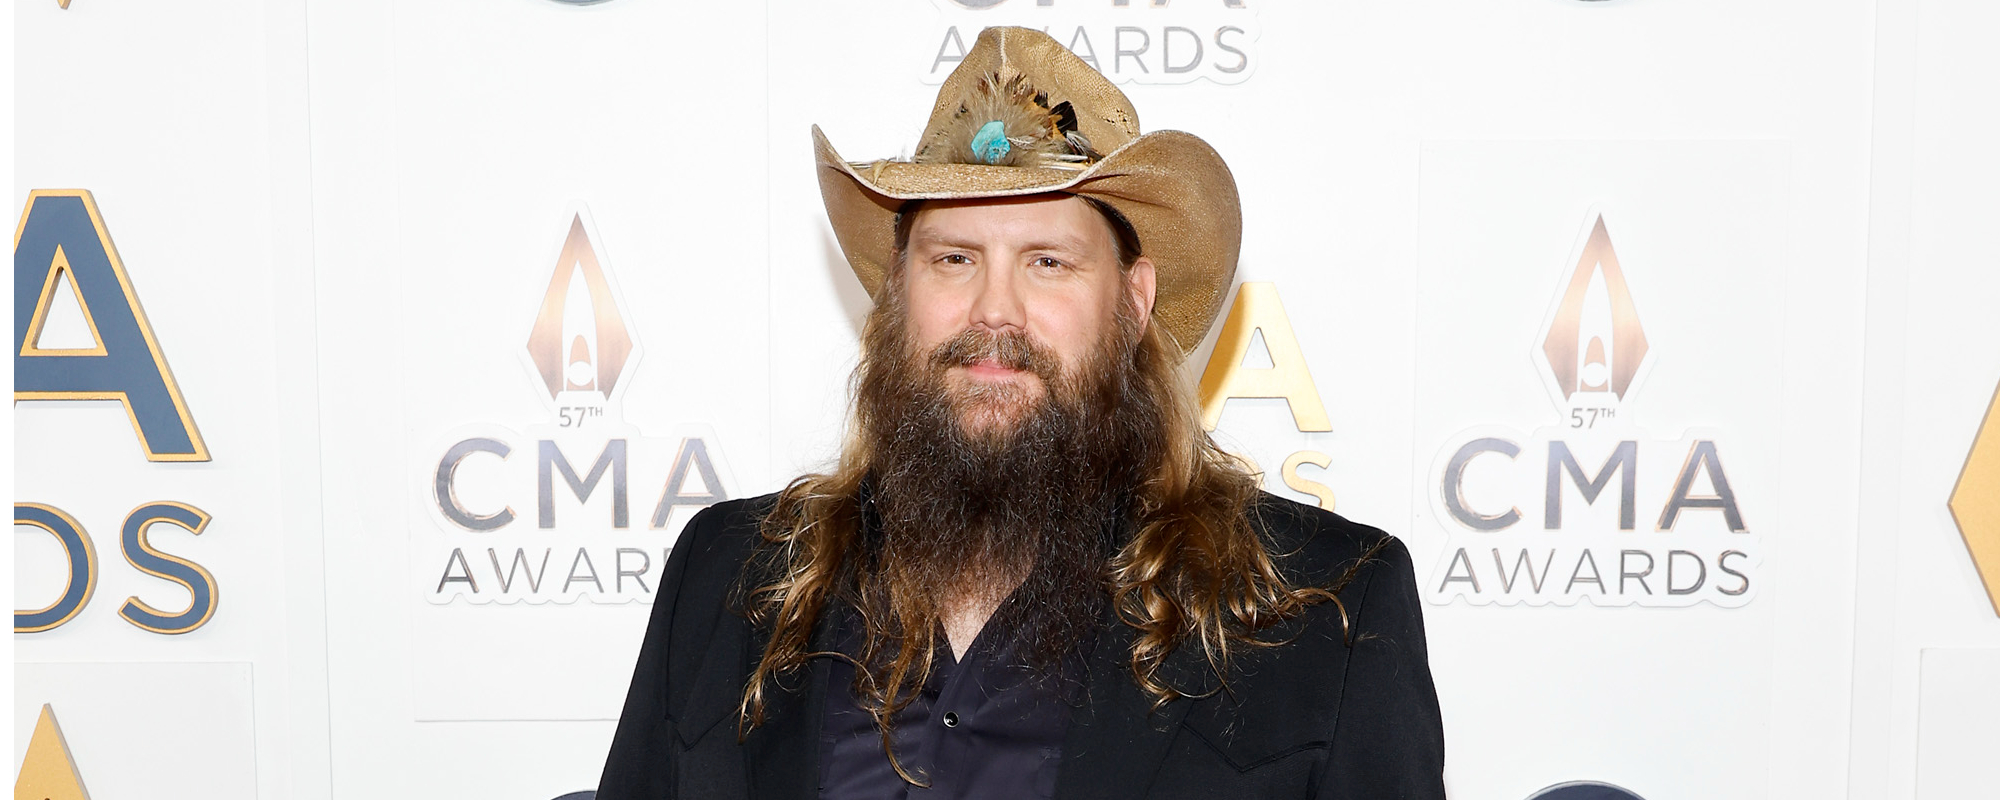 Watch Chris Stapleton Find Harmony With Jennifer Hudson & War and Treaty for “Loving You on My Mind” Performance